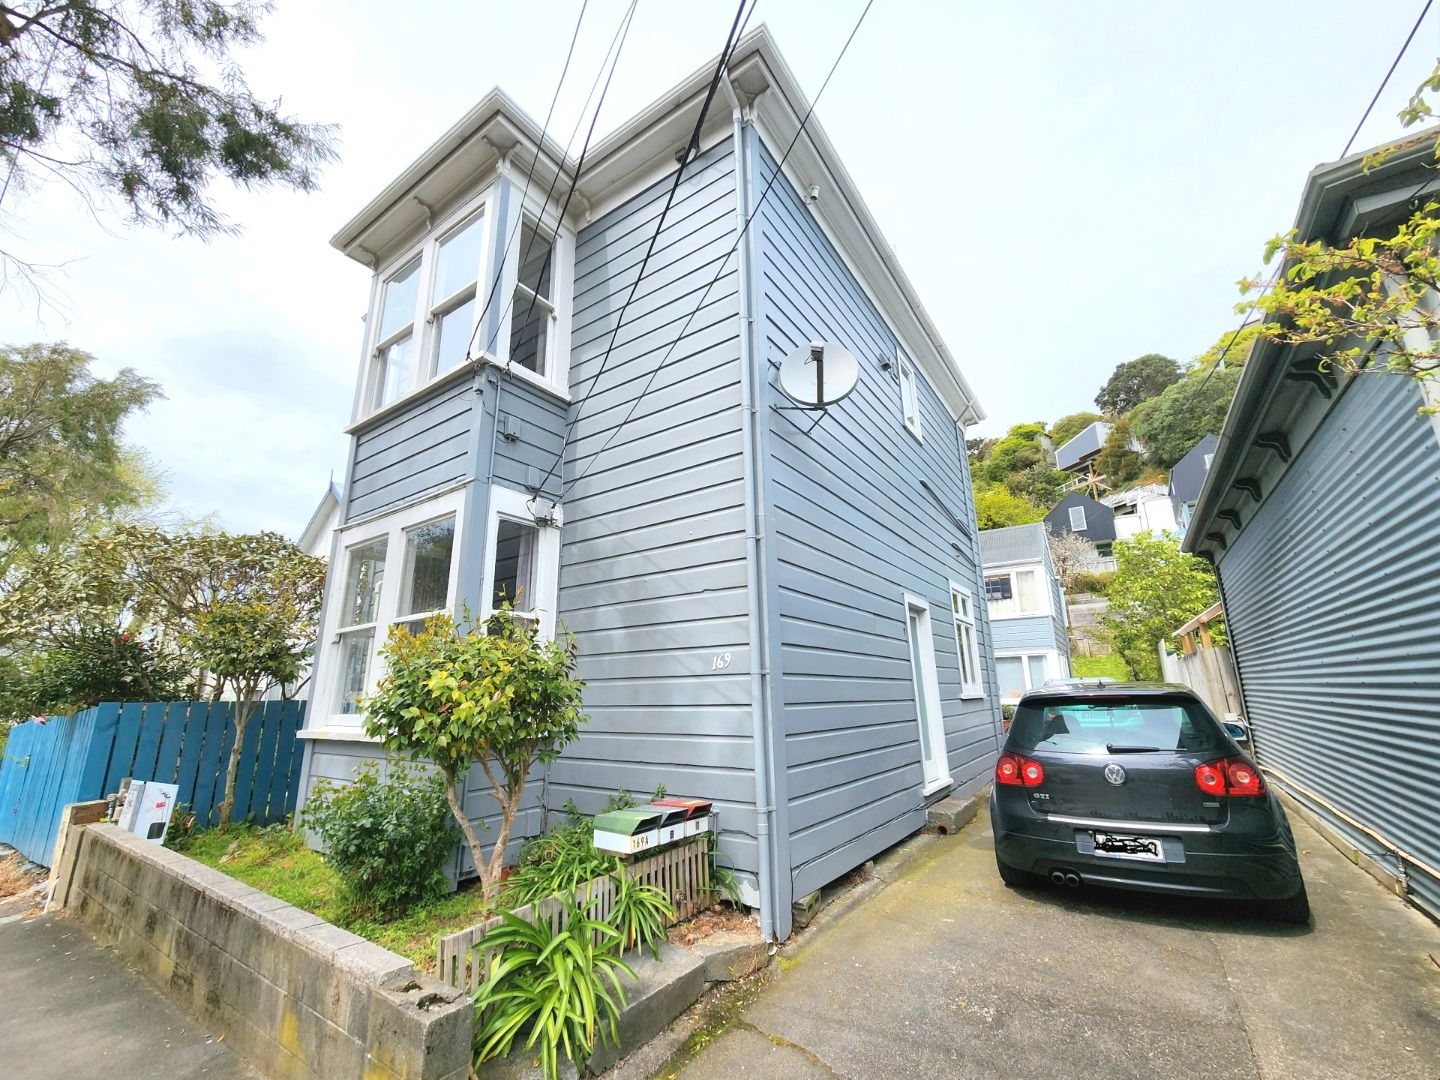 Real Estate For Rent Houses & Apartments : Aro Valley